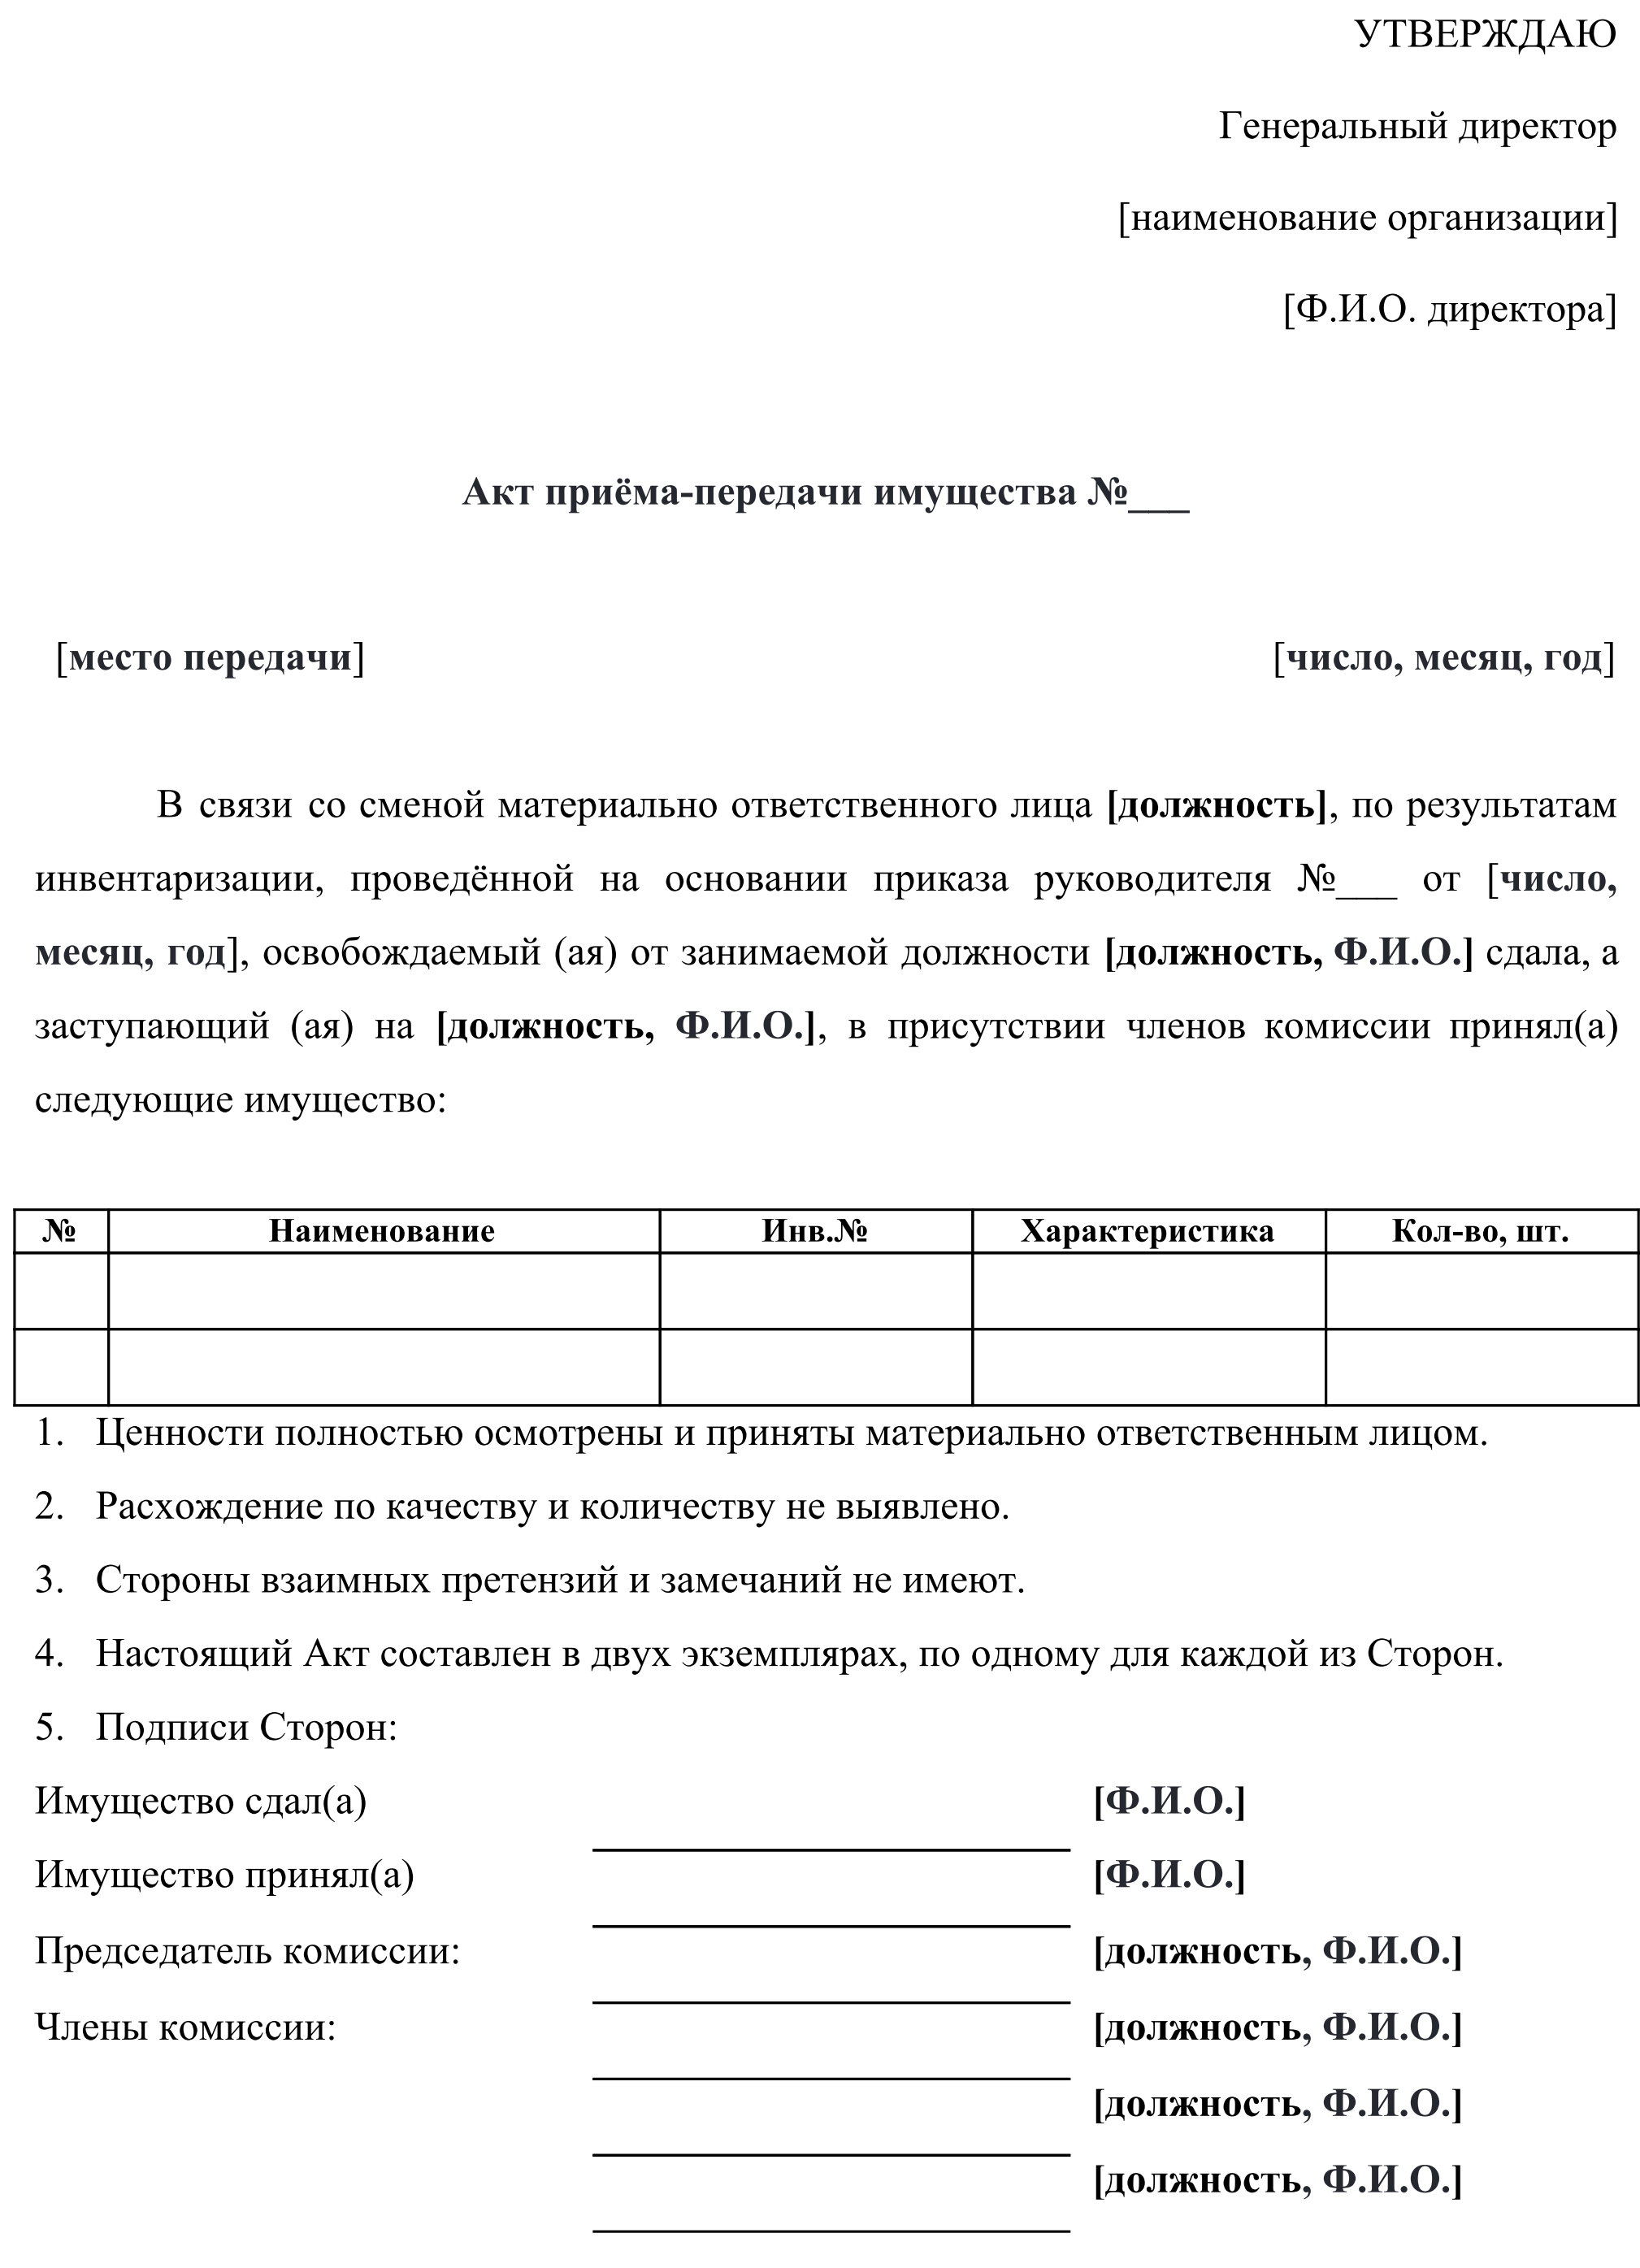 fish transfer acceptance certificate sample of the transfer proof of receipt образец